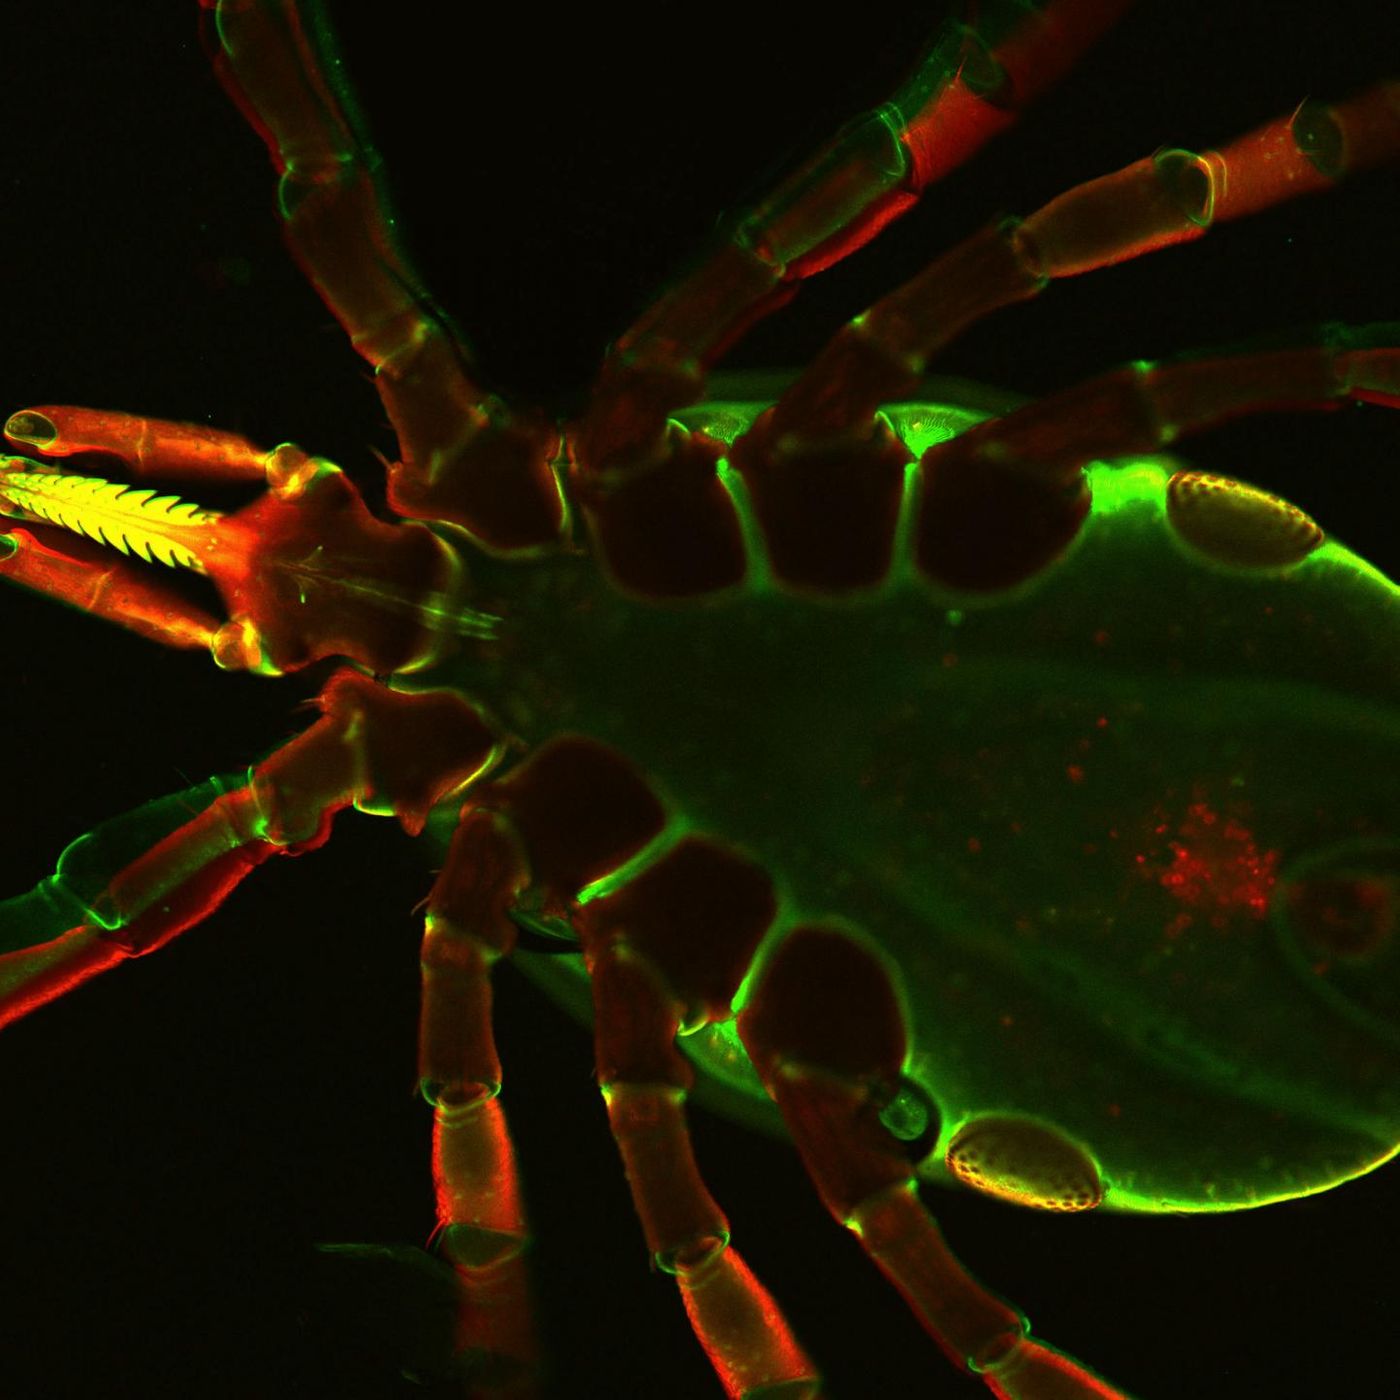 Ixodes scapularis ticks transmit the pathogens of Lyme disease, resulting a multisystem illness in a variety of animals and humans. The image shows bottom side a live Ixodes tick as seen under a confocal immunofluorescence microscope. / Credit: Dr. Utpal Pal, University of Maryland